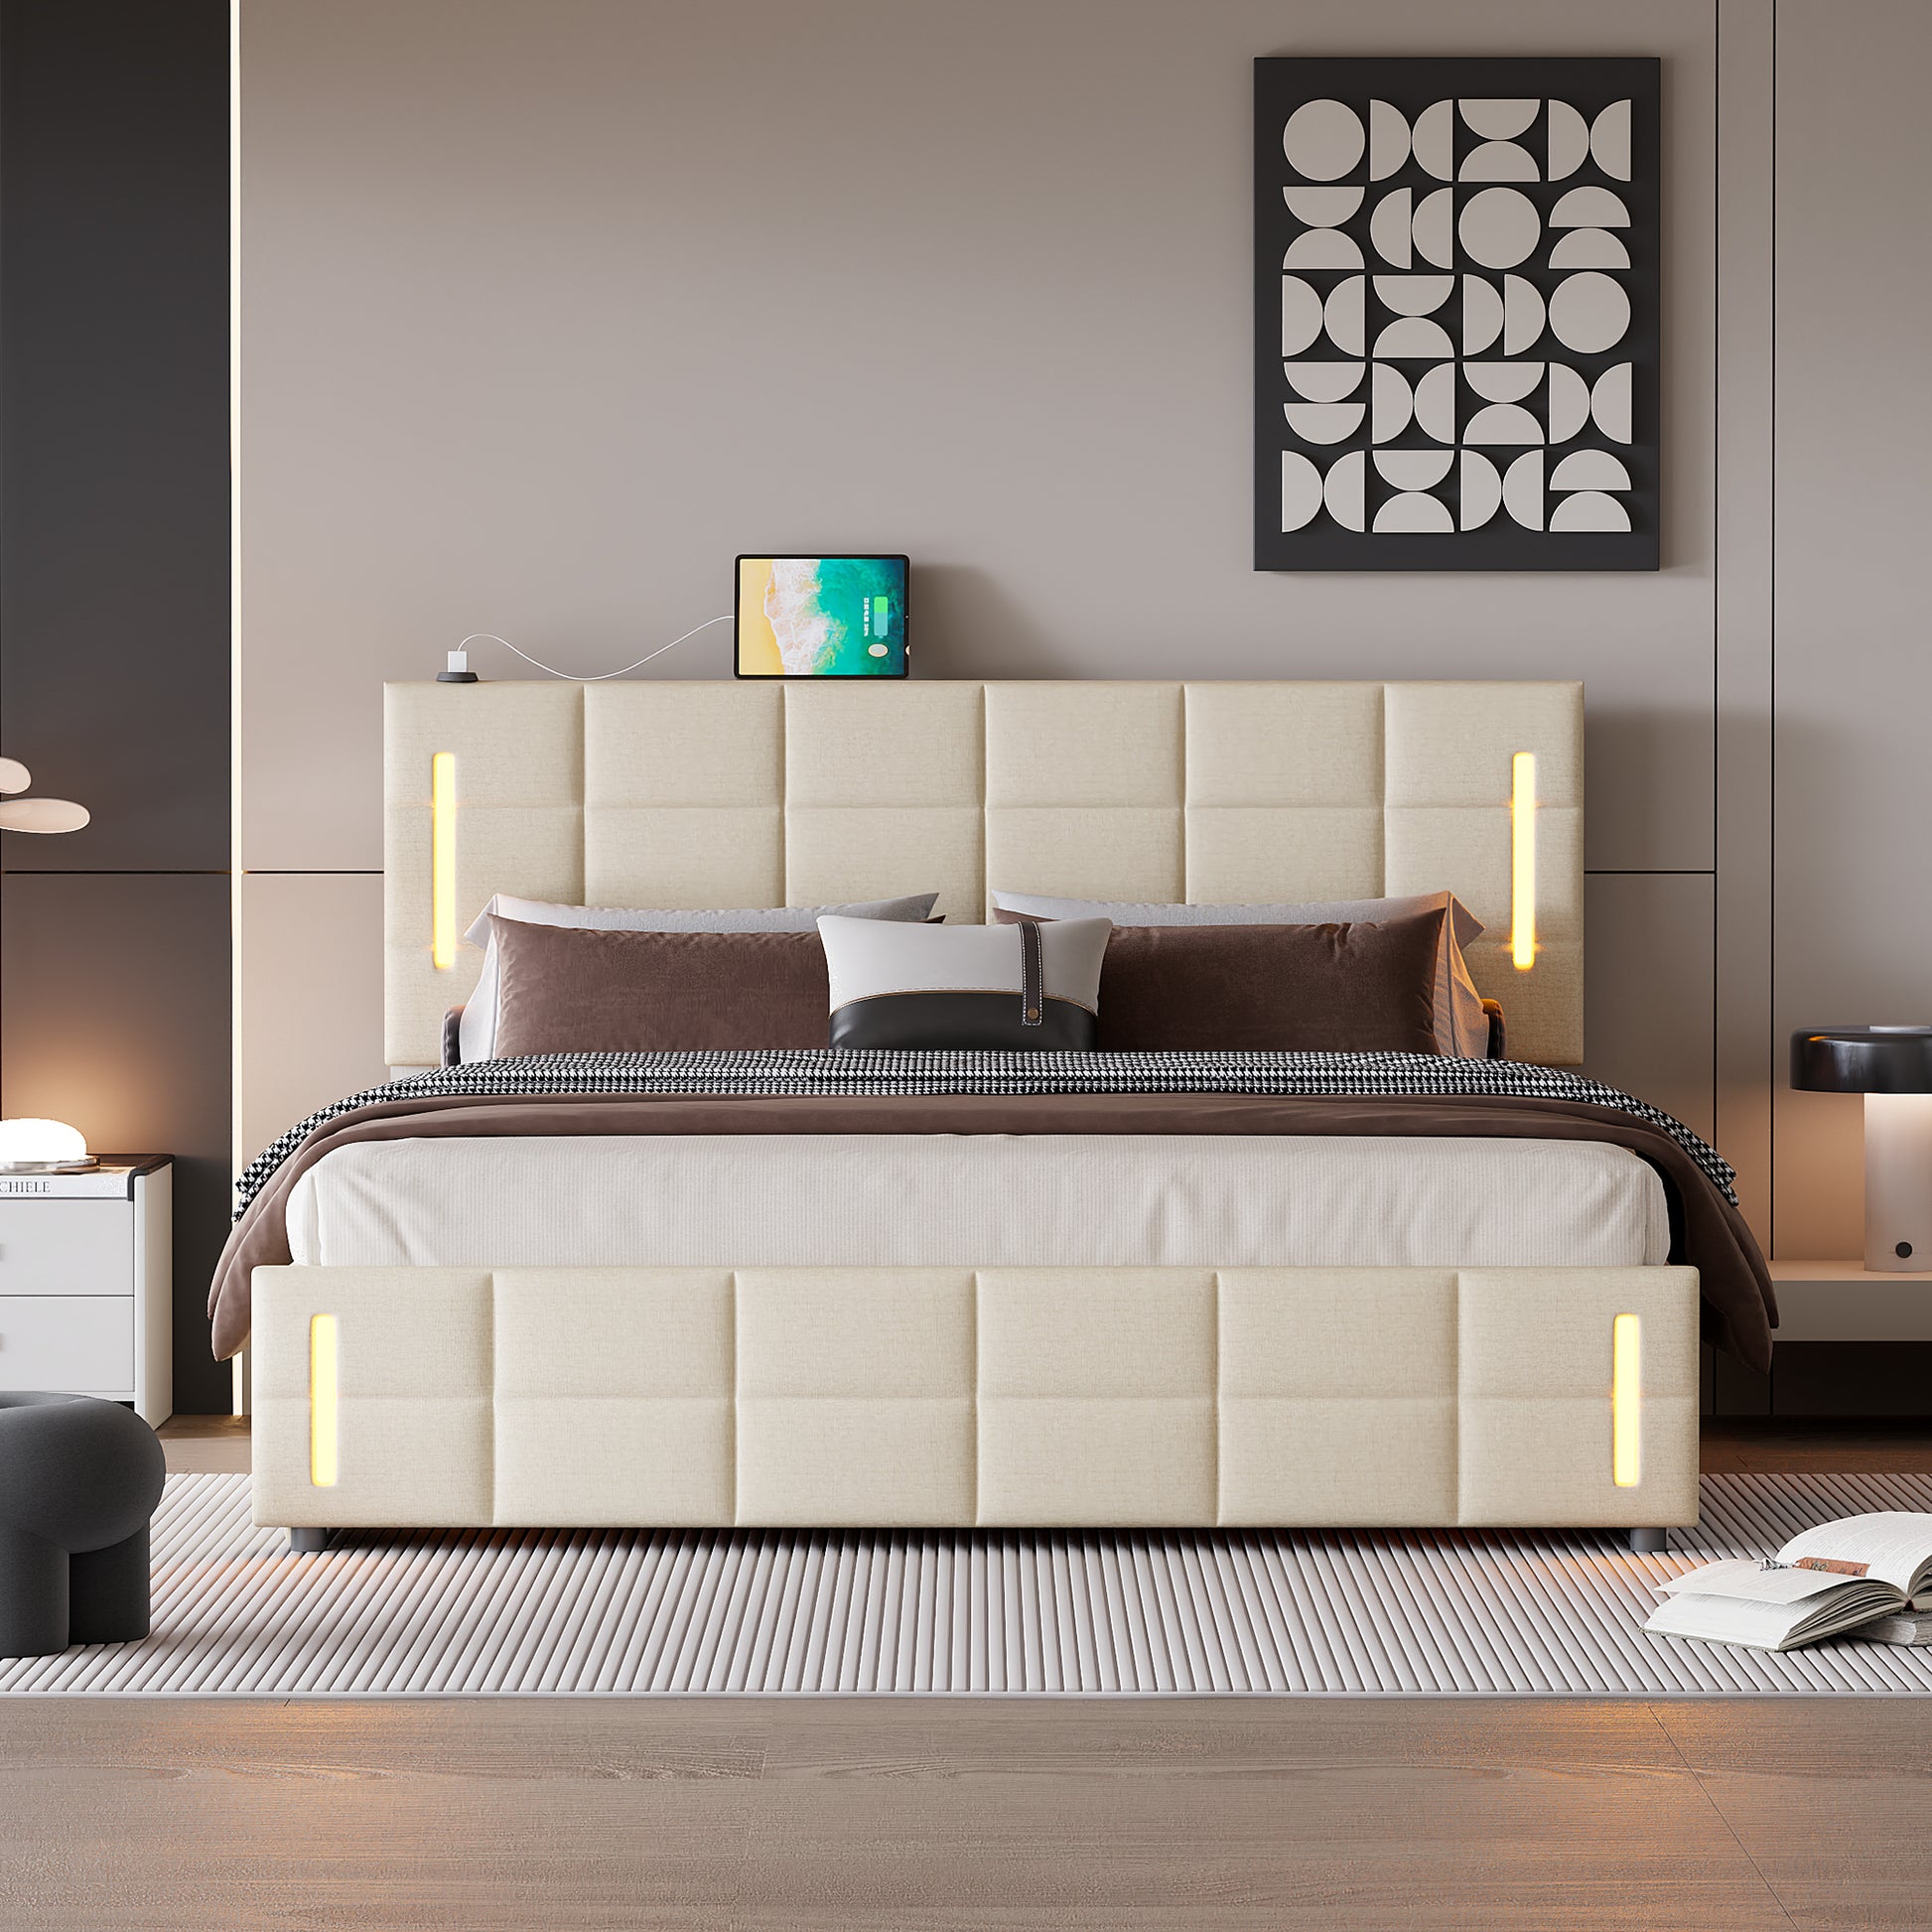 Queen Size Upholstered Bed with Hydraulic Storage System and LED Light, Beige - Enova Luxe Home Store